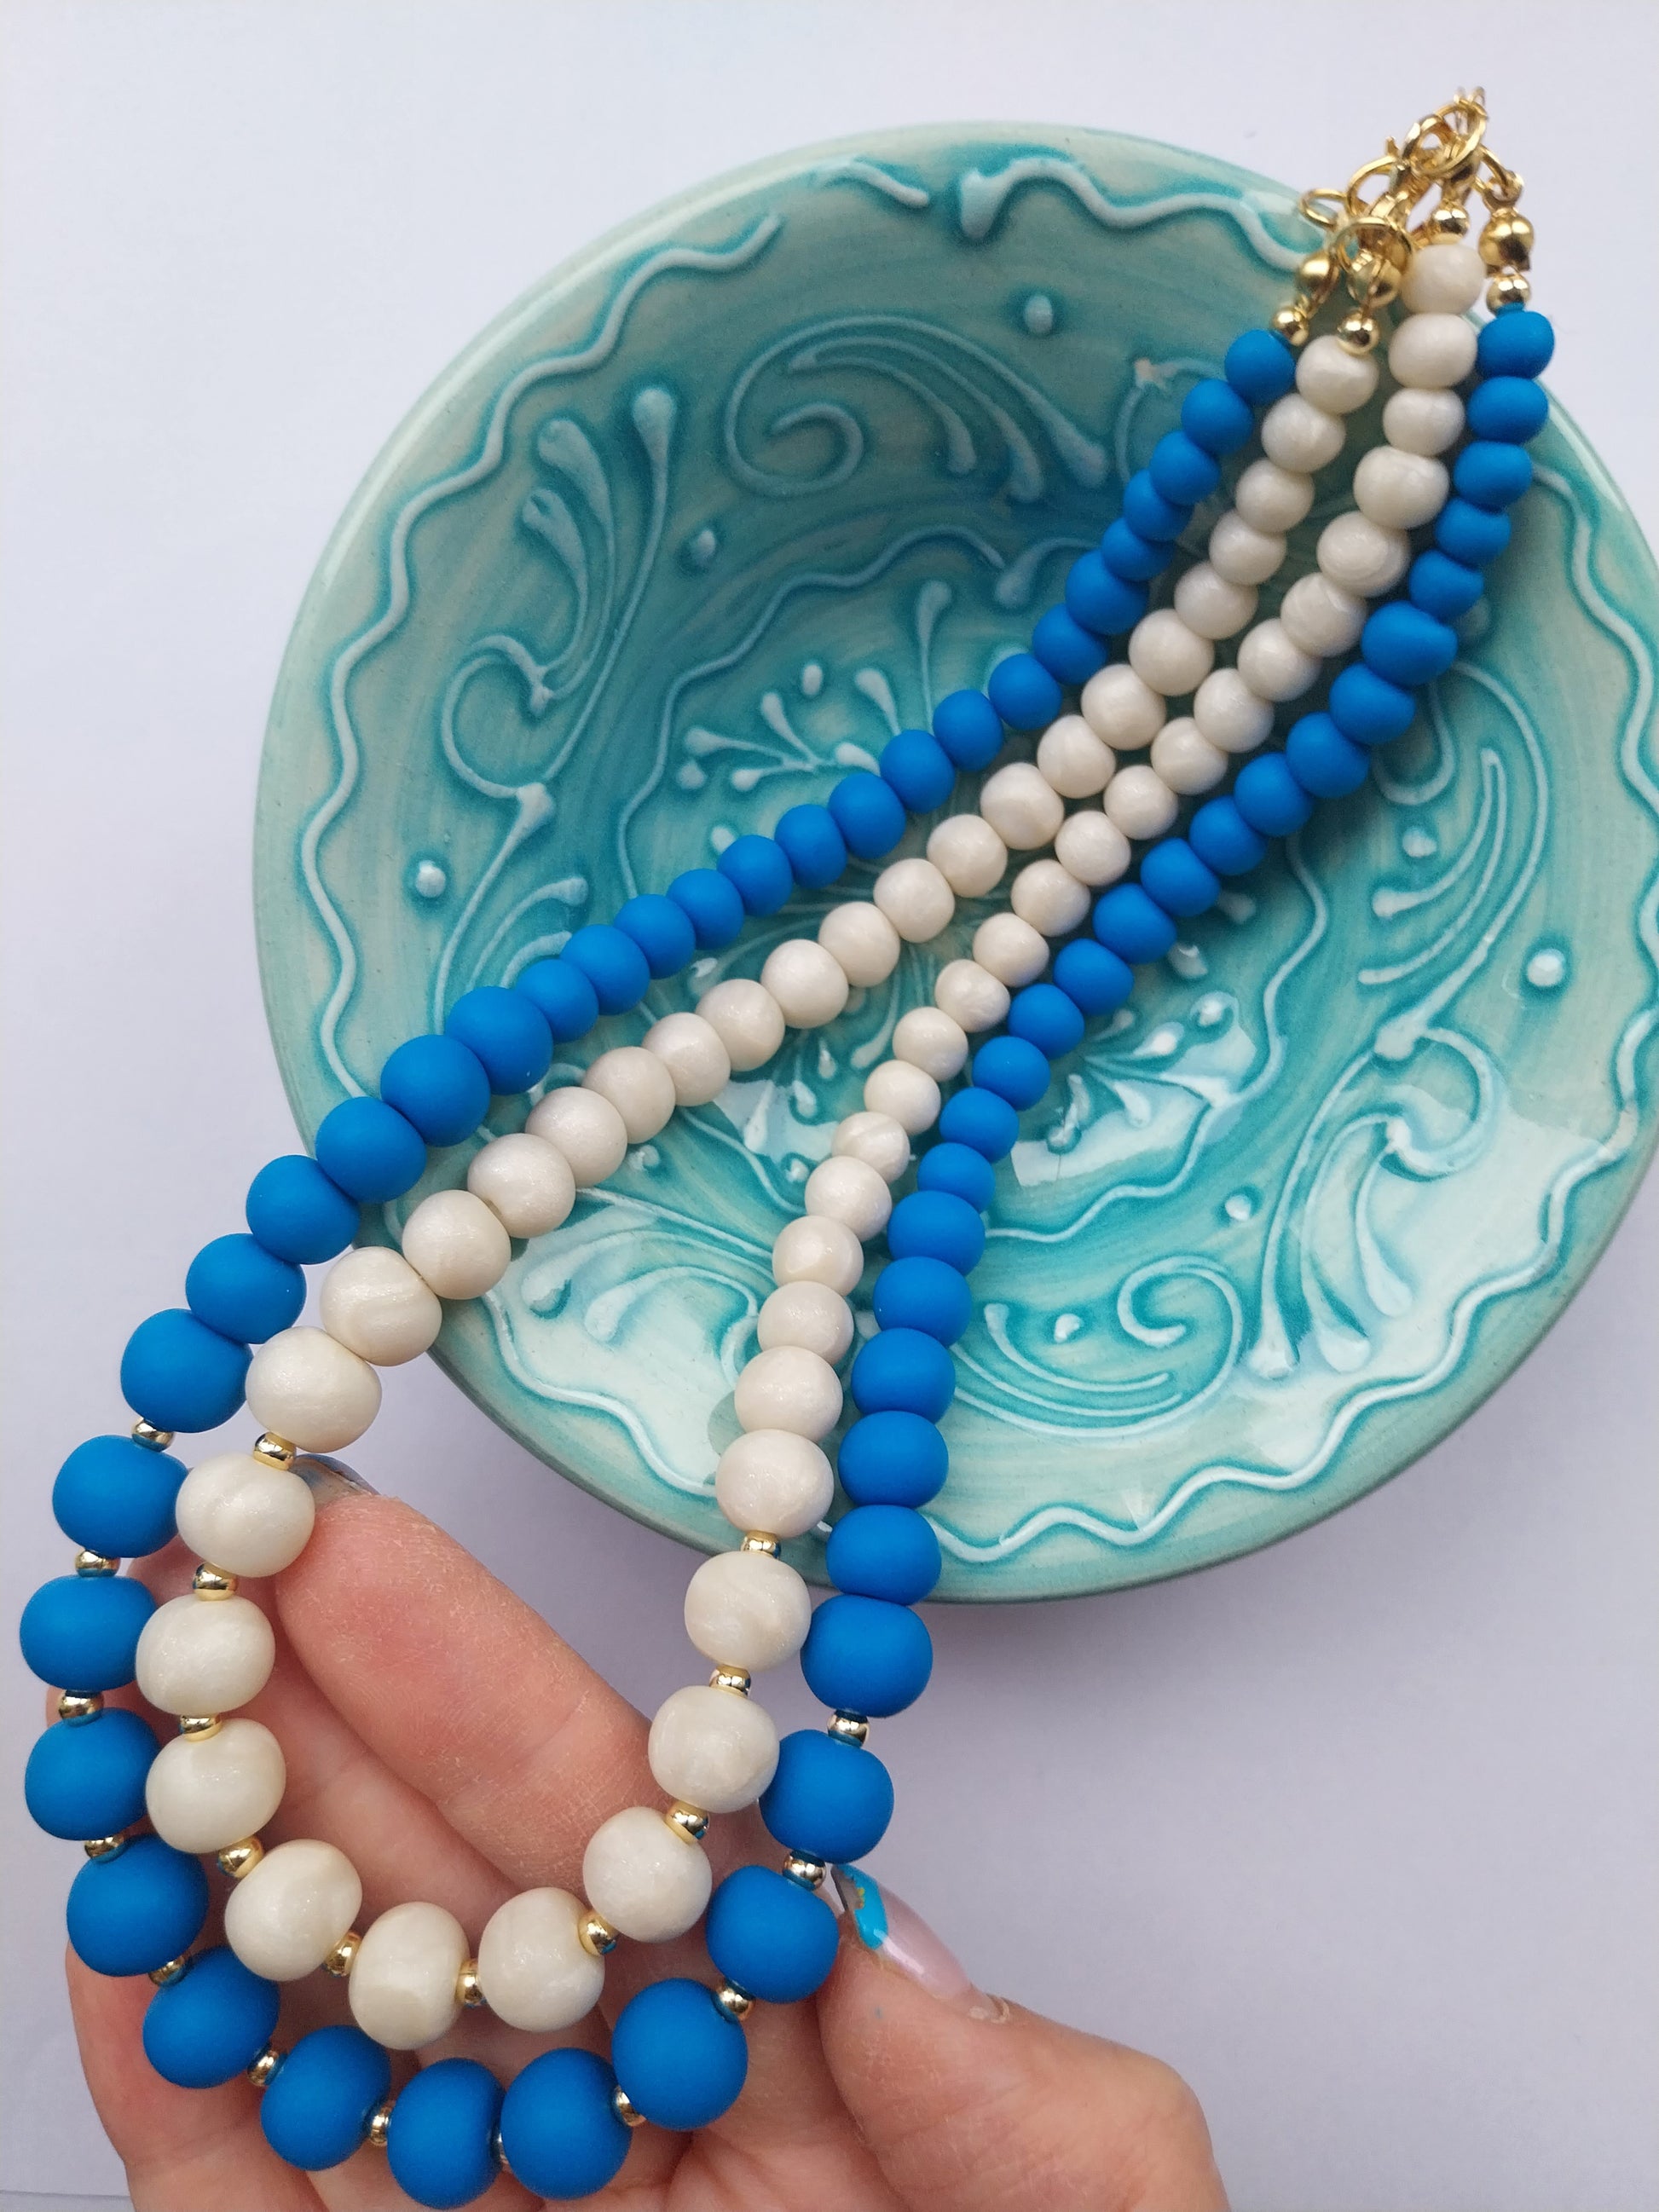 Blue and mother of pearl effect necklaces